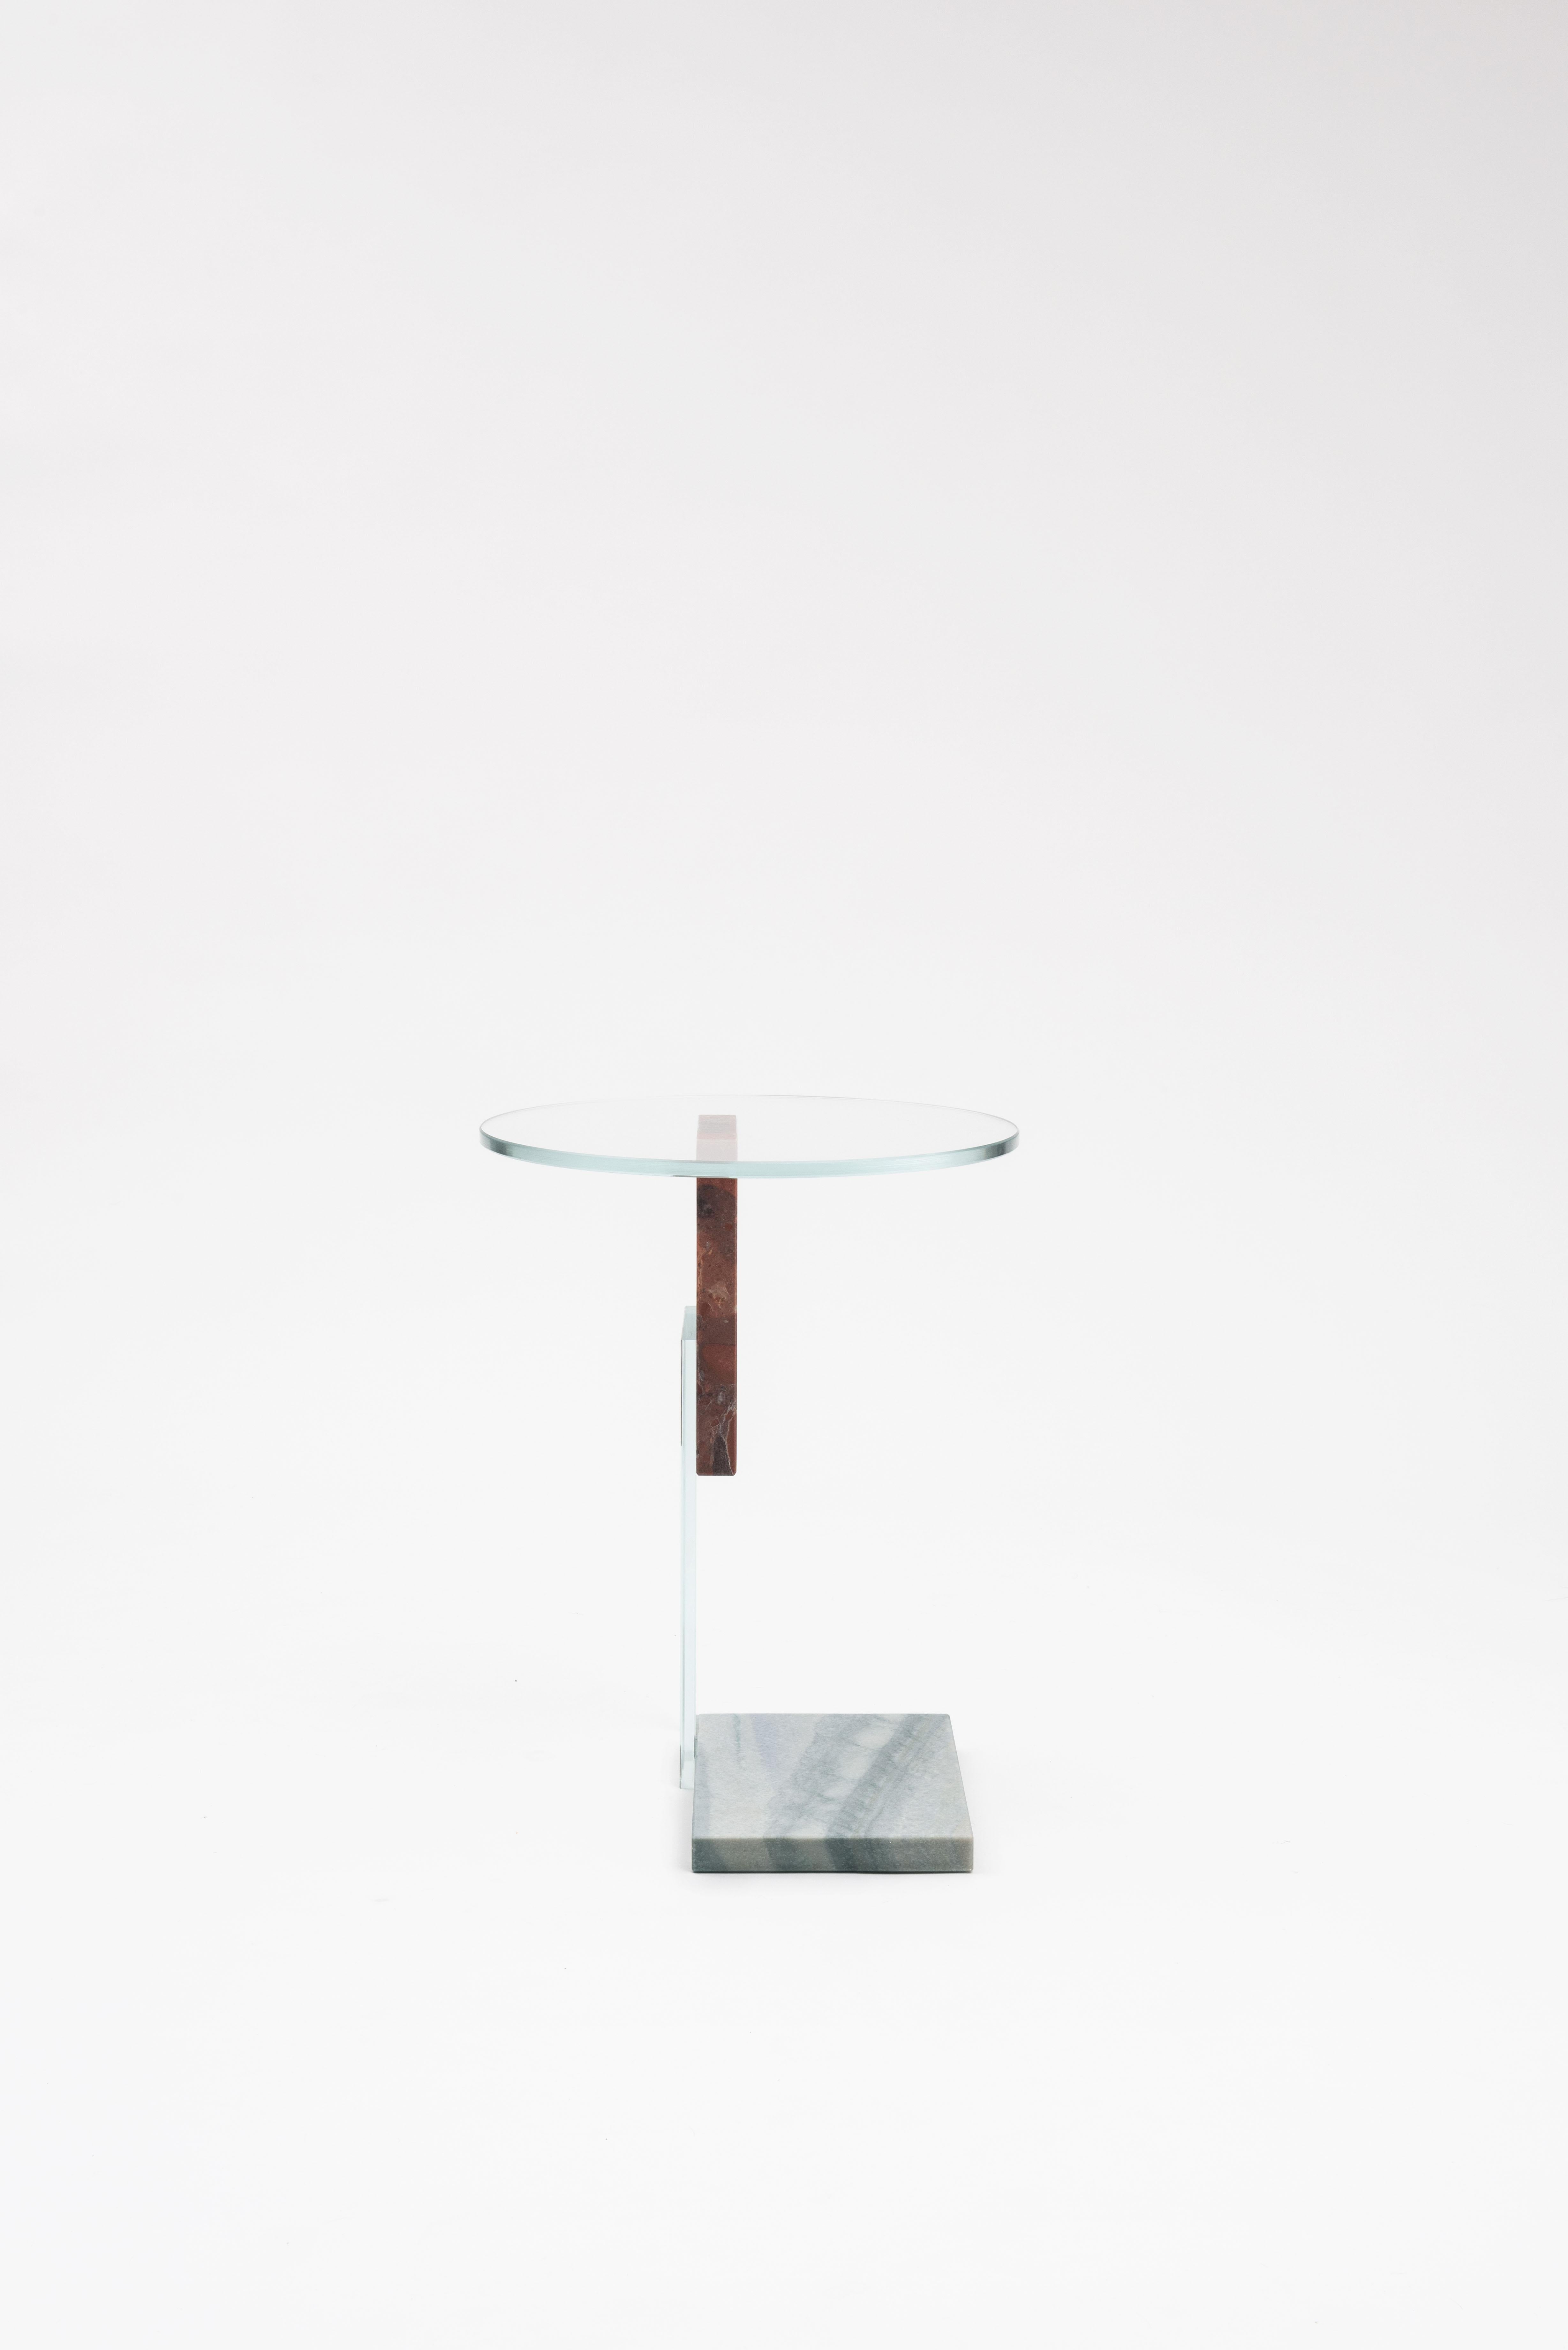 French Delta S Side Table by Frederic Saulou